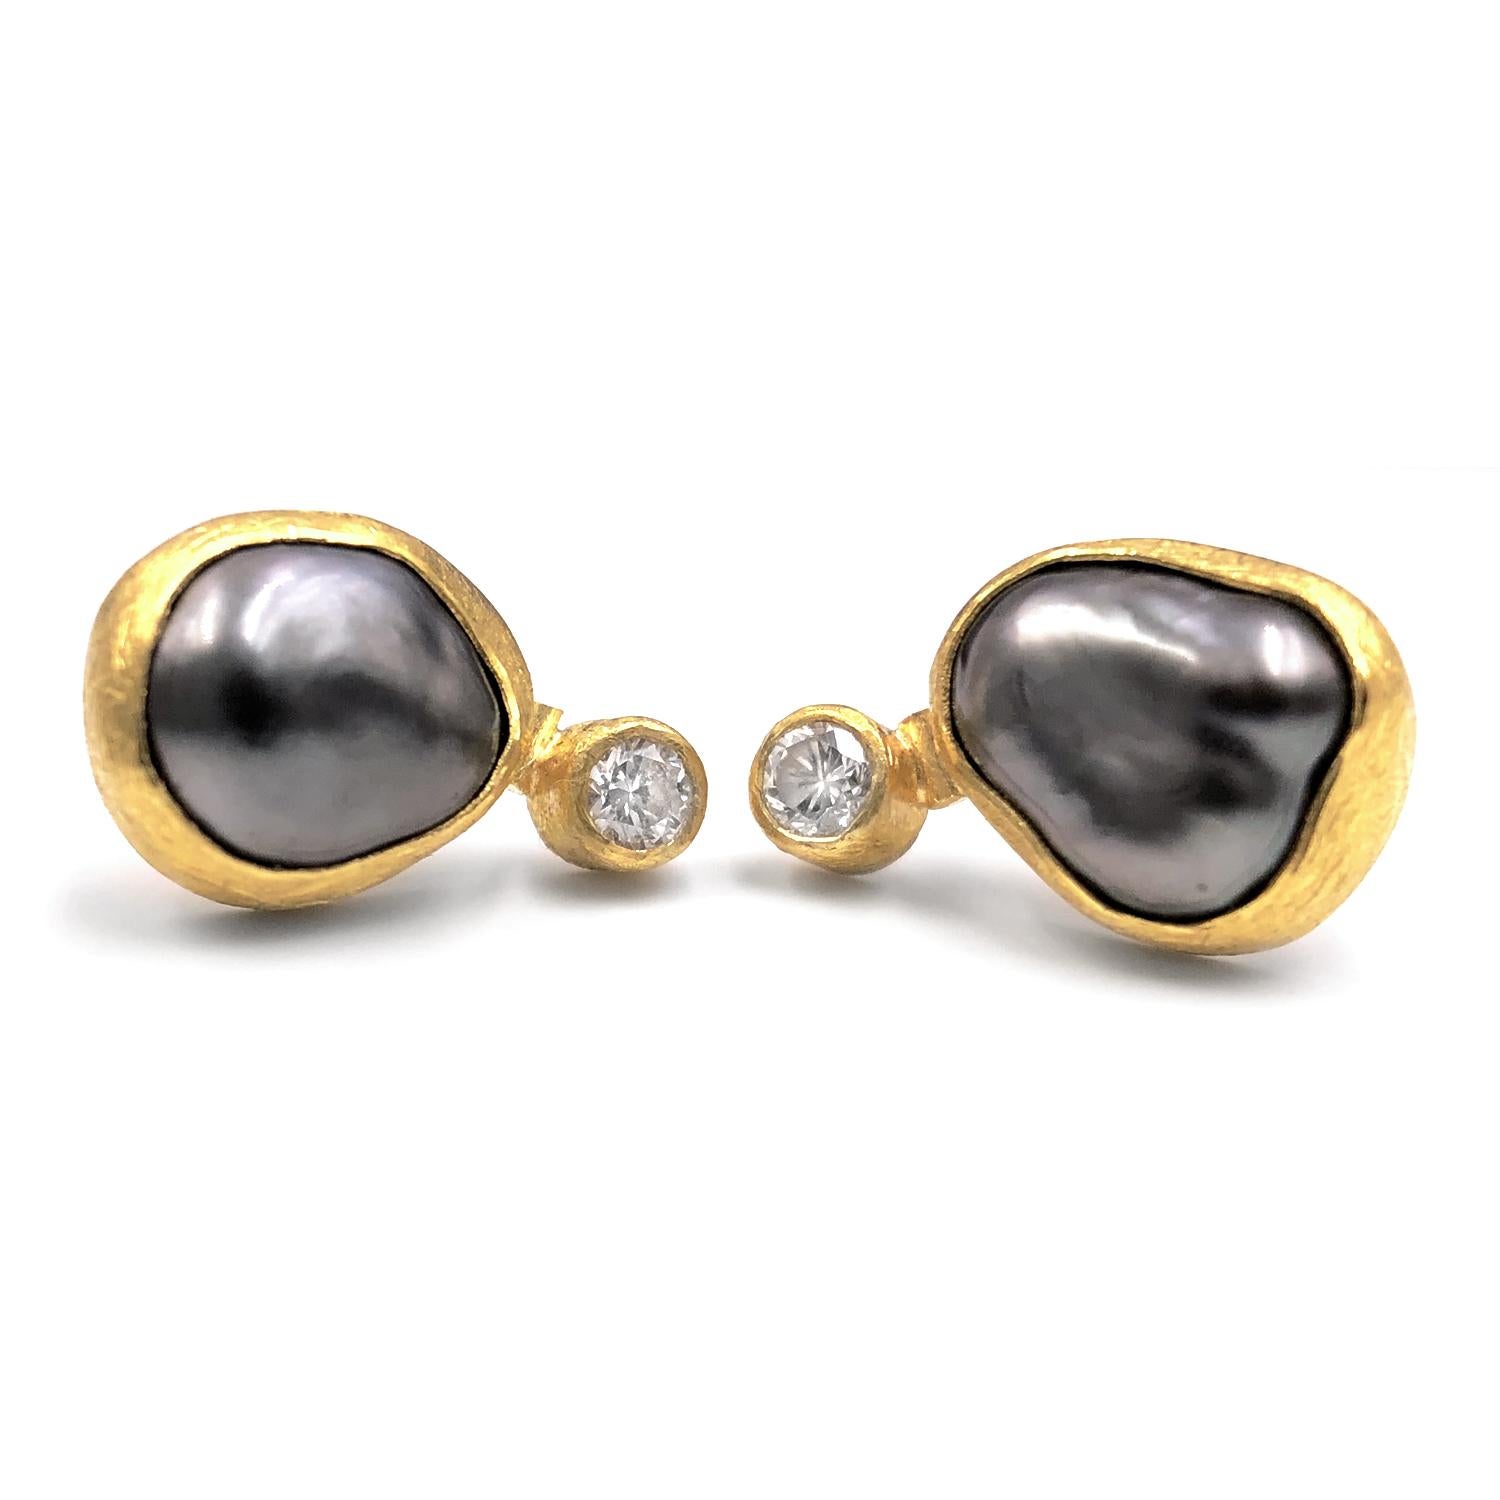 One of a Kind Double Stud Earrings handcrafted by jewelry artist Petra Class in signature-finished 22k yellow gold featuring a gorgeous pair of lustrous Tahitian keshi pearls accented with two 0.10 carat round brilliant-cut white diamonds (0.20tcw).